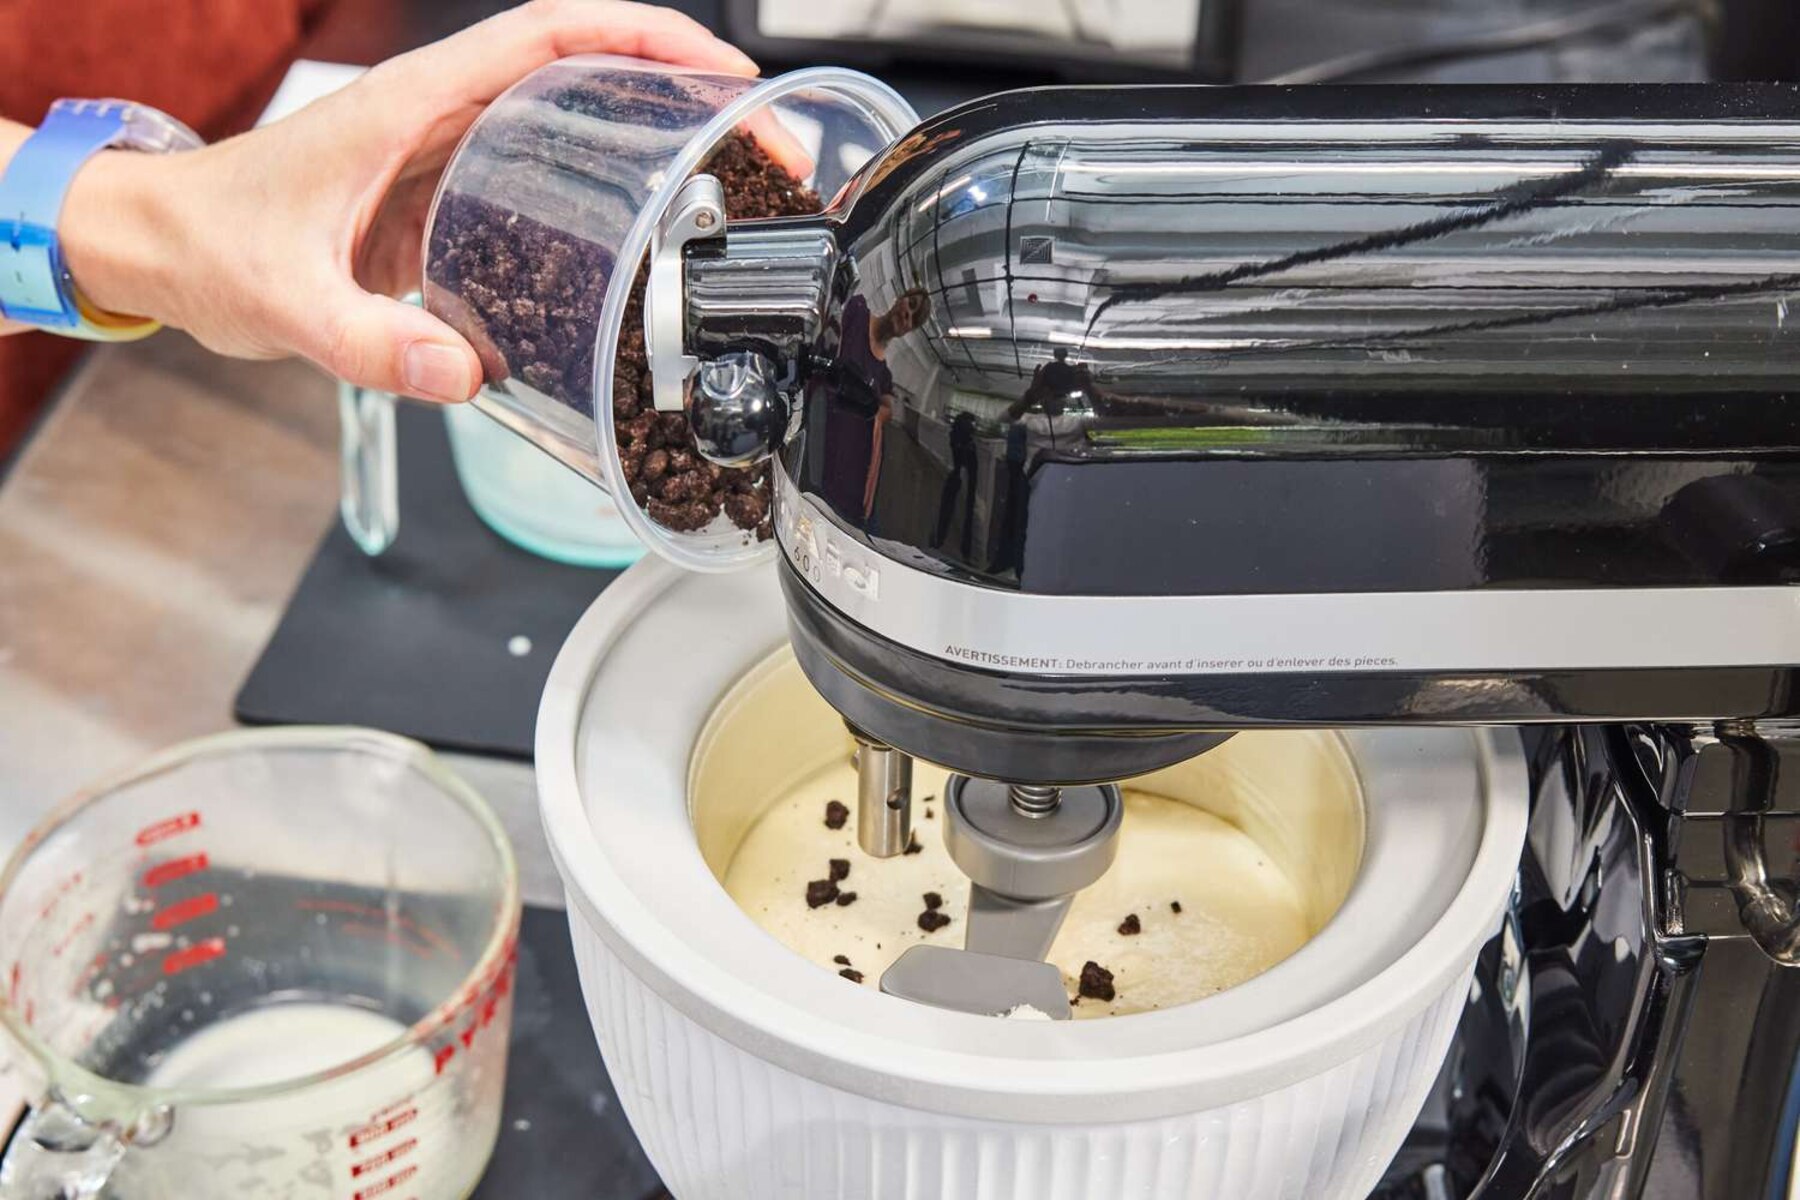 Testing a Gadget: The My Pint Ice Cream Maker from Dash 